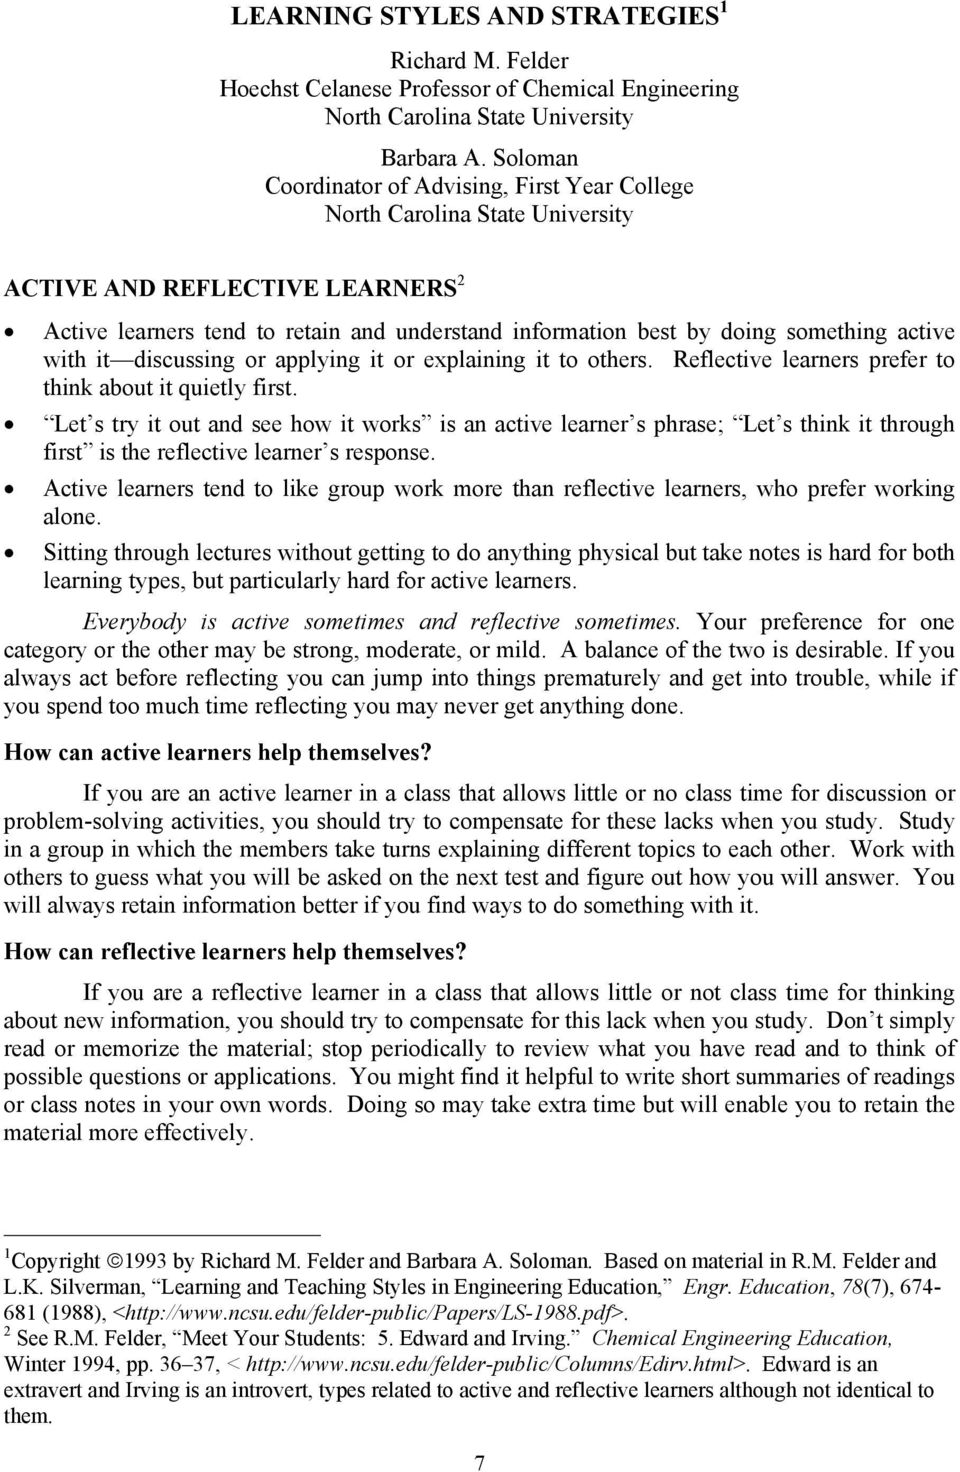 active with it discussing or applying it or explaining it to others. Reflective learners prefer to think about it quietly first.